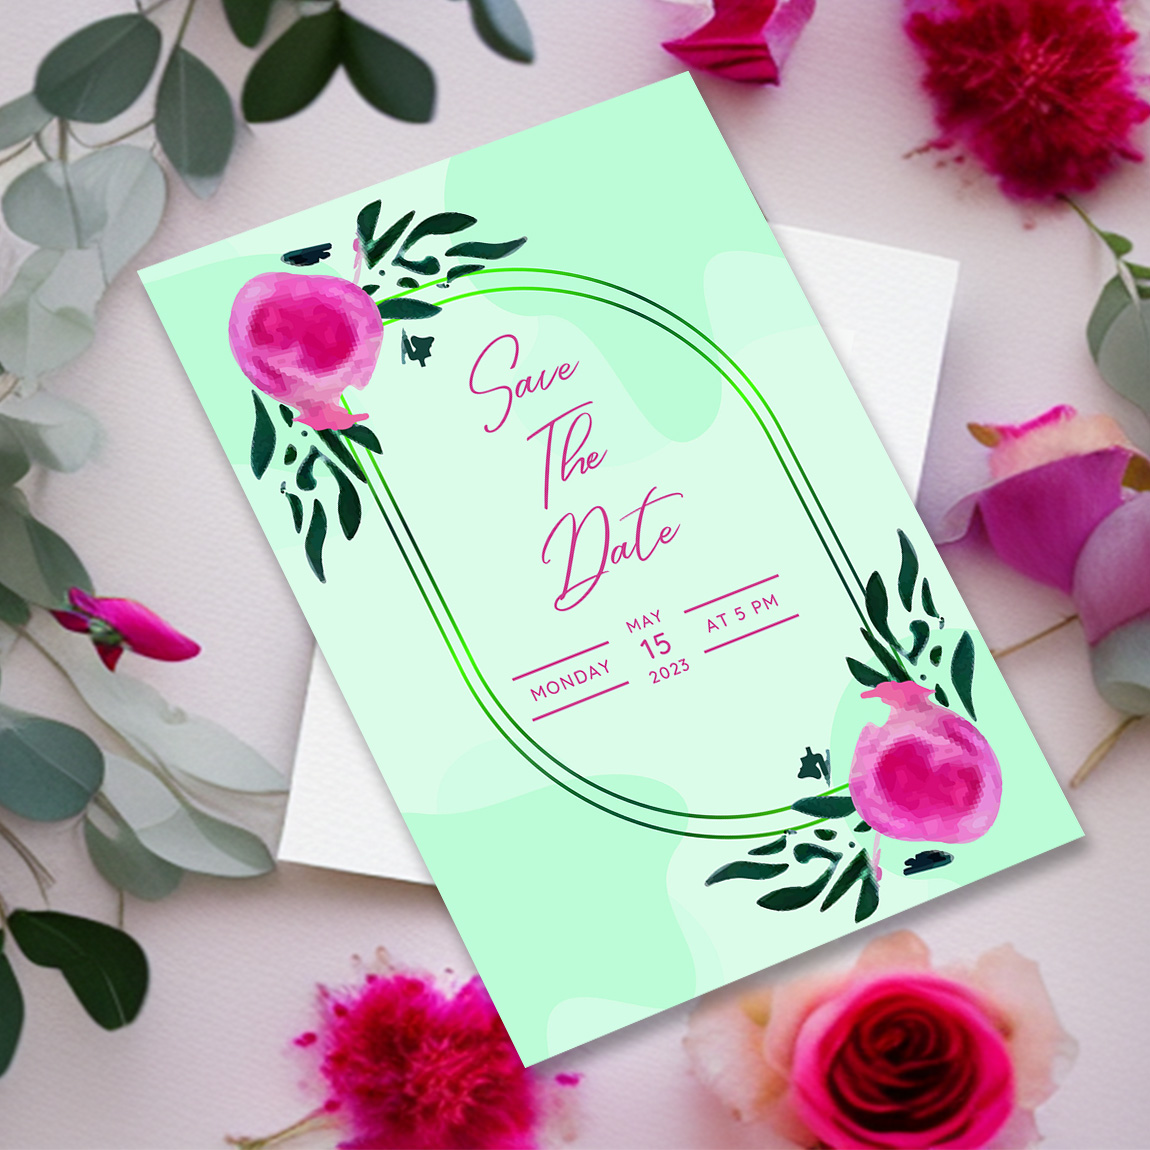 Image with enchanting wedding invitation card with watercolor flowers.